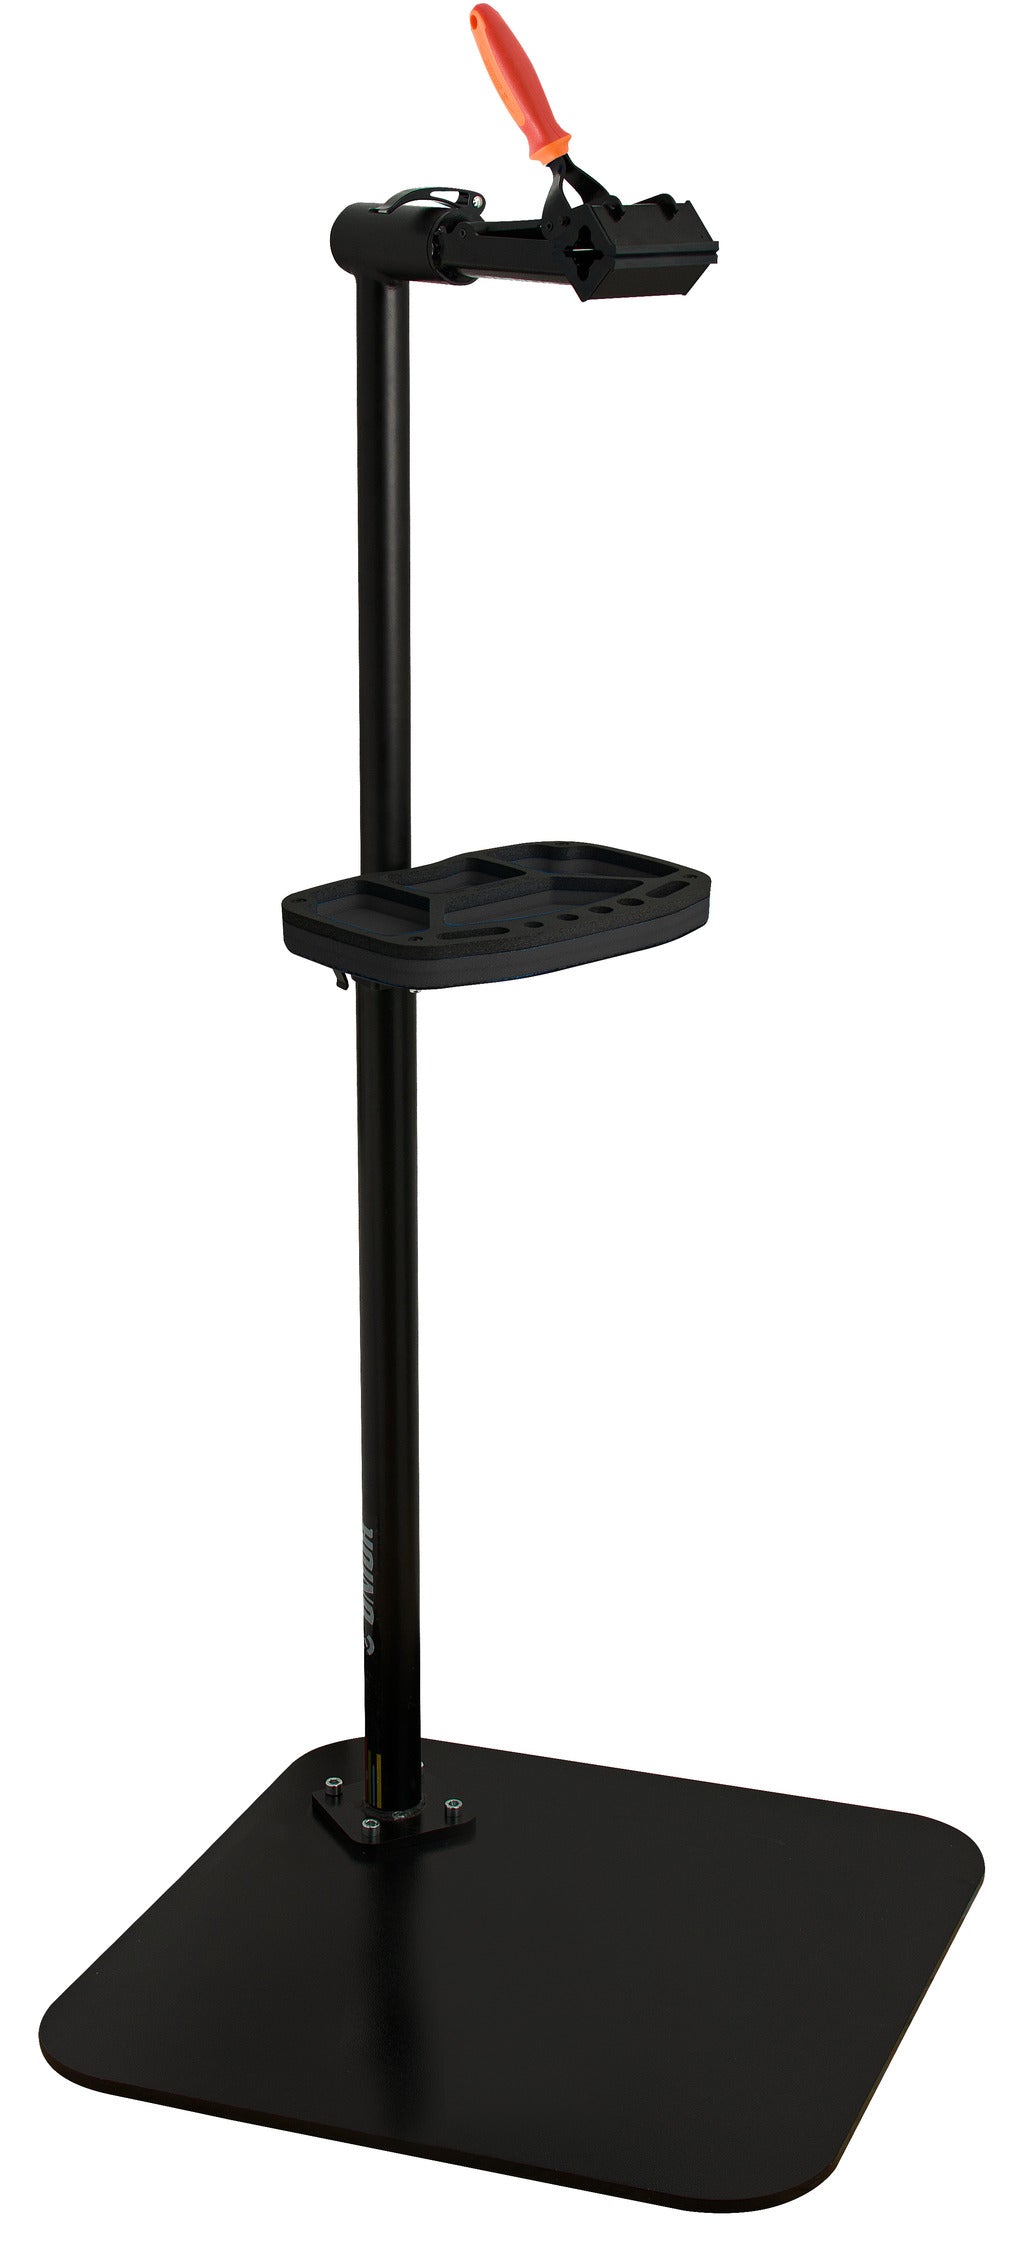 Pro Repair Stand With Single Clamp, Auto Adjustable - 1693B-US